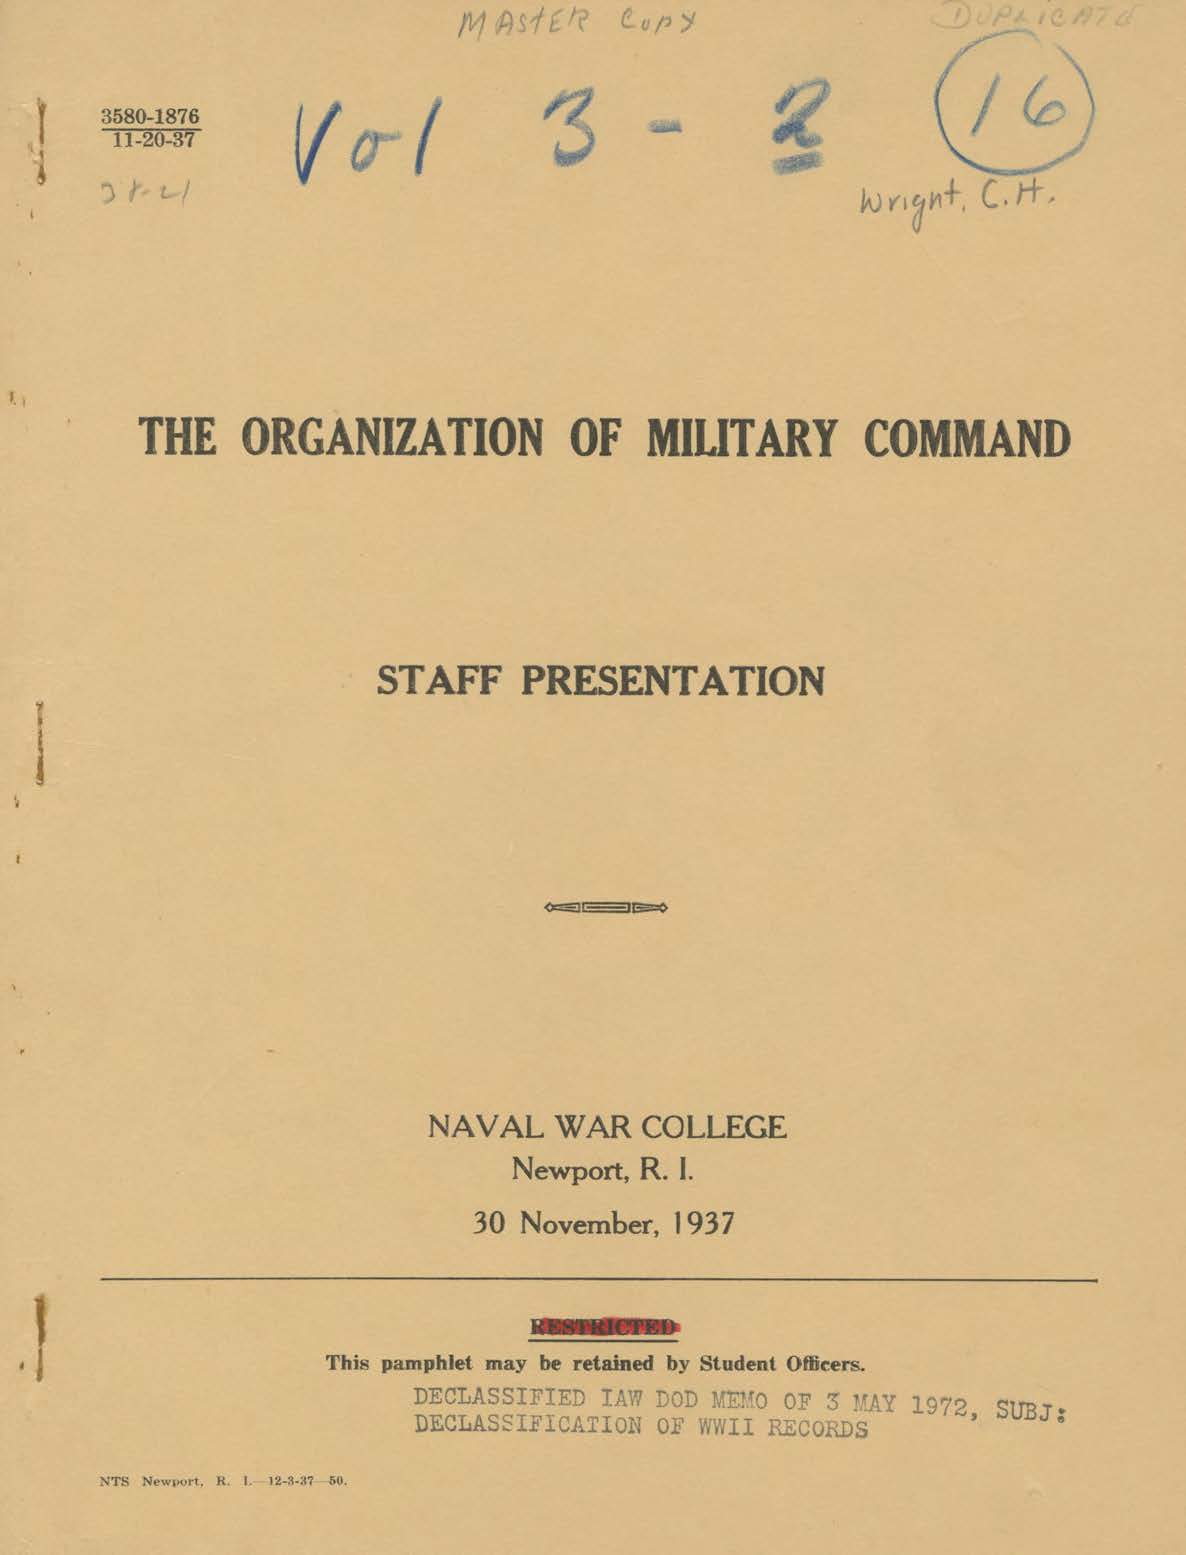 Organization of Military Command, Clement H. Wright